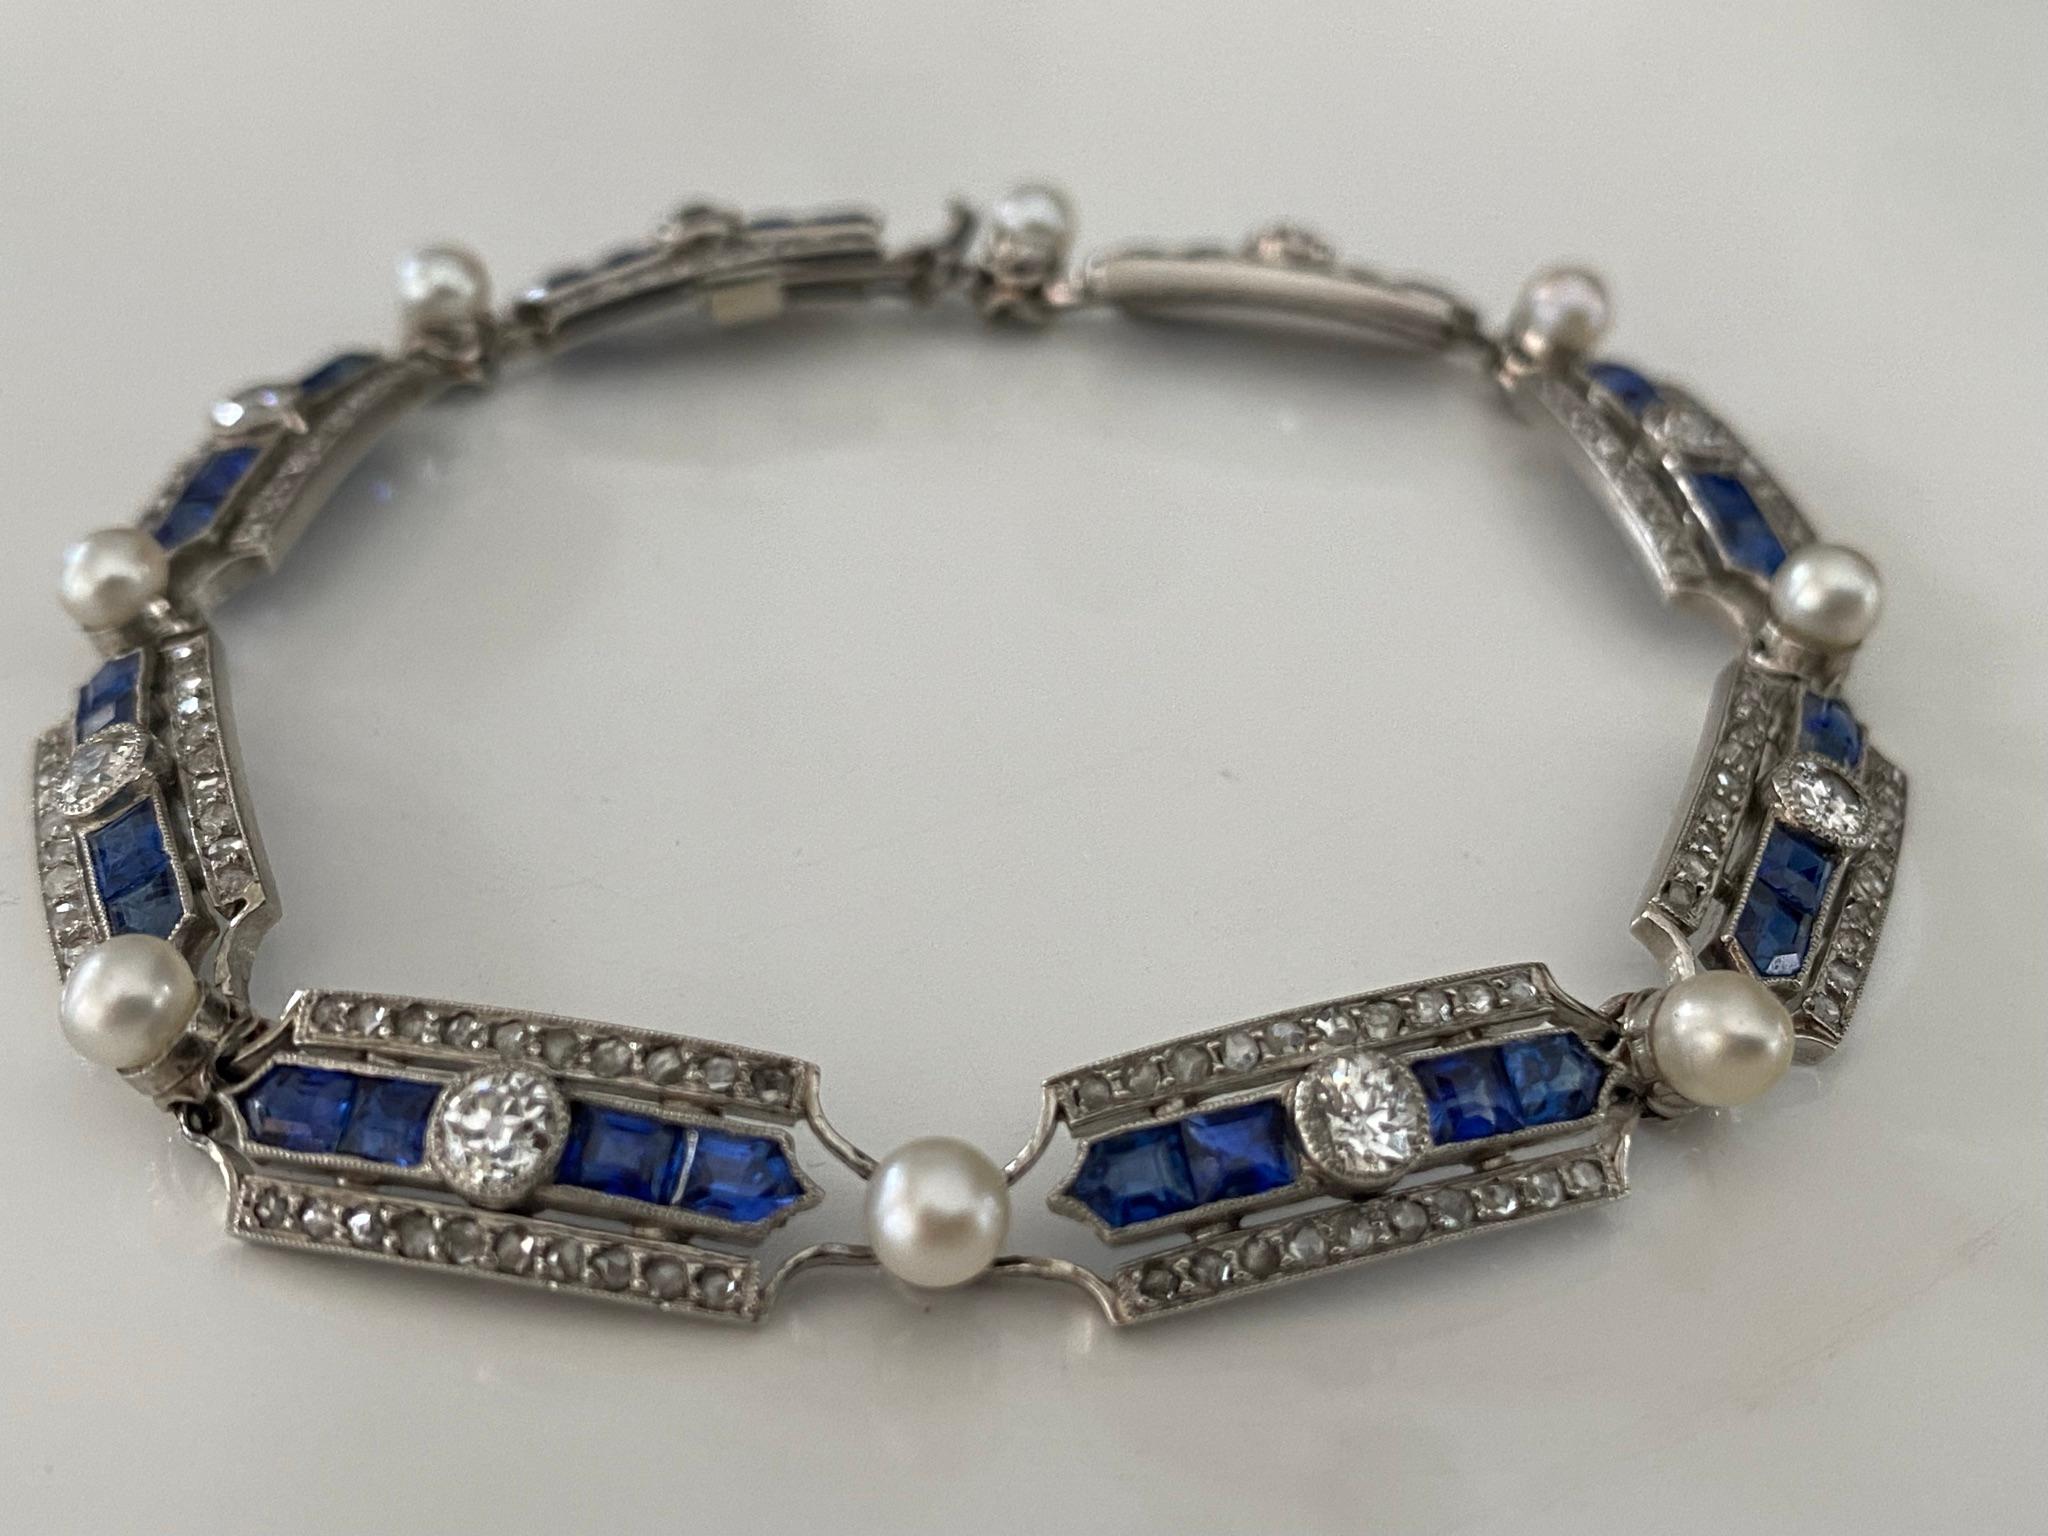 Circa 1910-1915, this magnificent antique French Belle Epoque link bracelet is composed of a repeating geometrical design centered by an Old European cut diamond flanked by four calibrated blue sapphires and two rows of small glittering rose cut